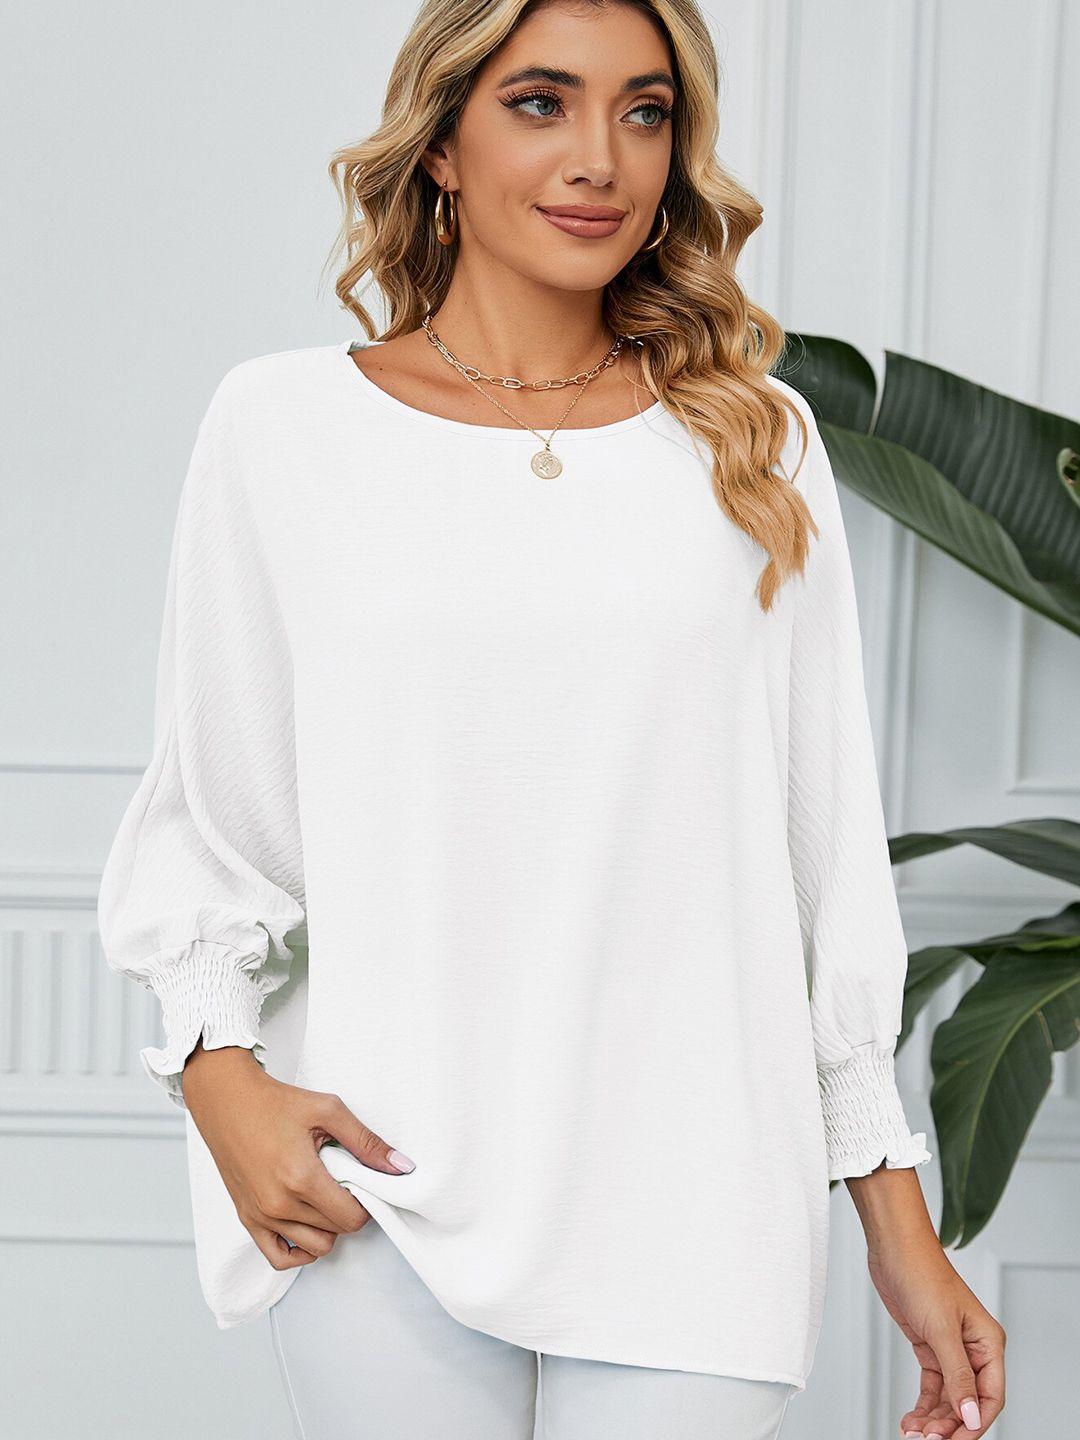 stylecast white batwing sleeve chambray top